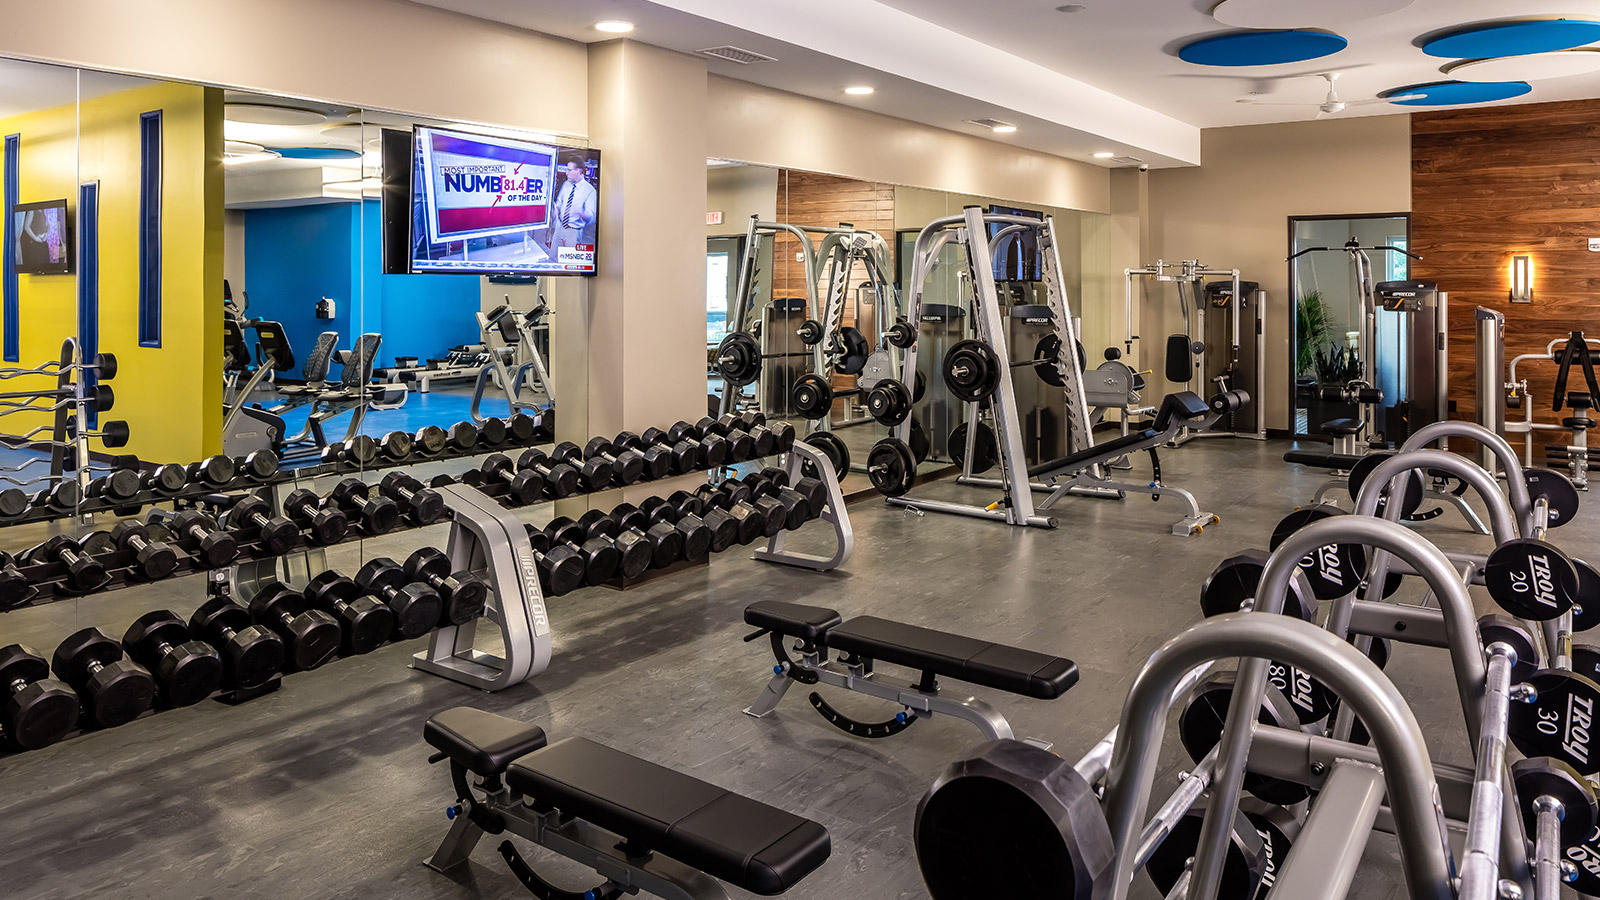 Fitness center gym with free weights and weight machines